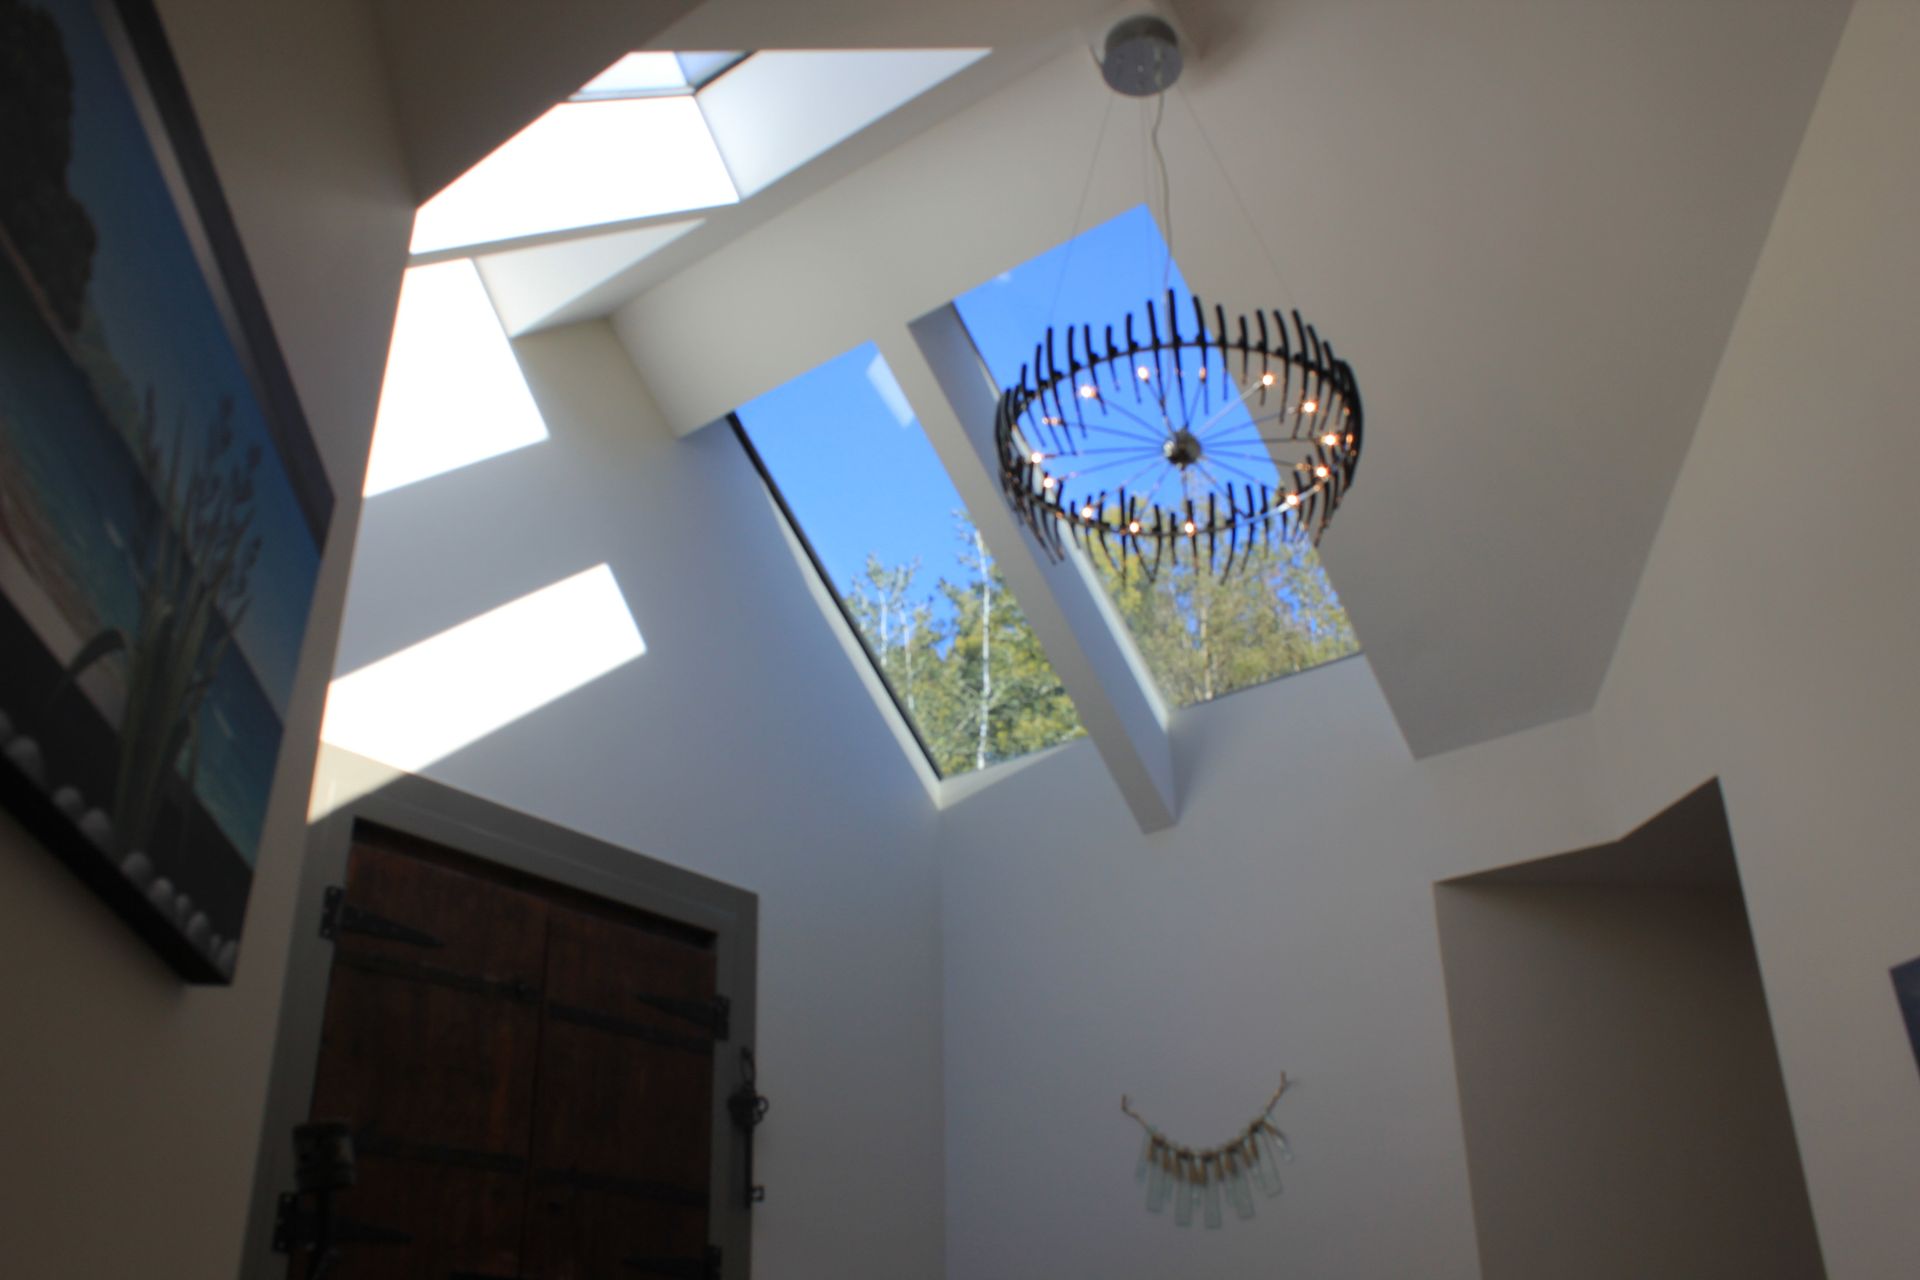 View of a skylight in the house